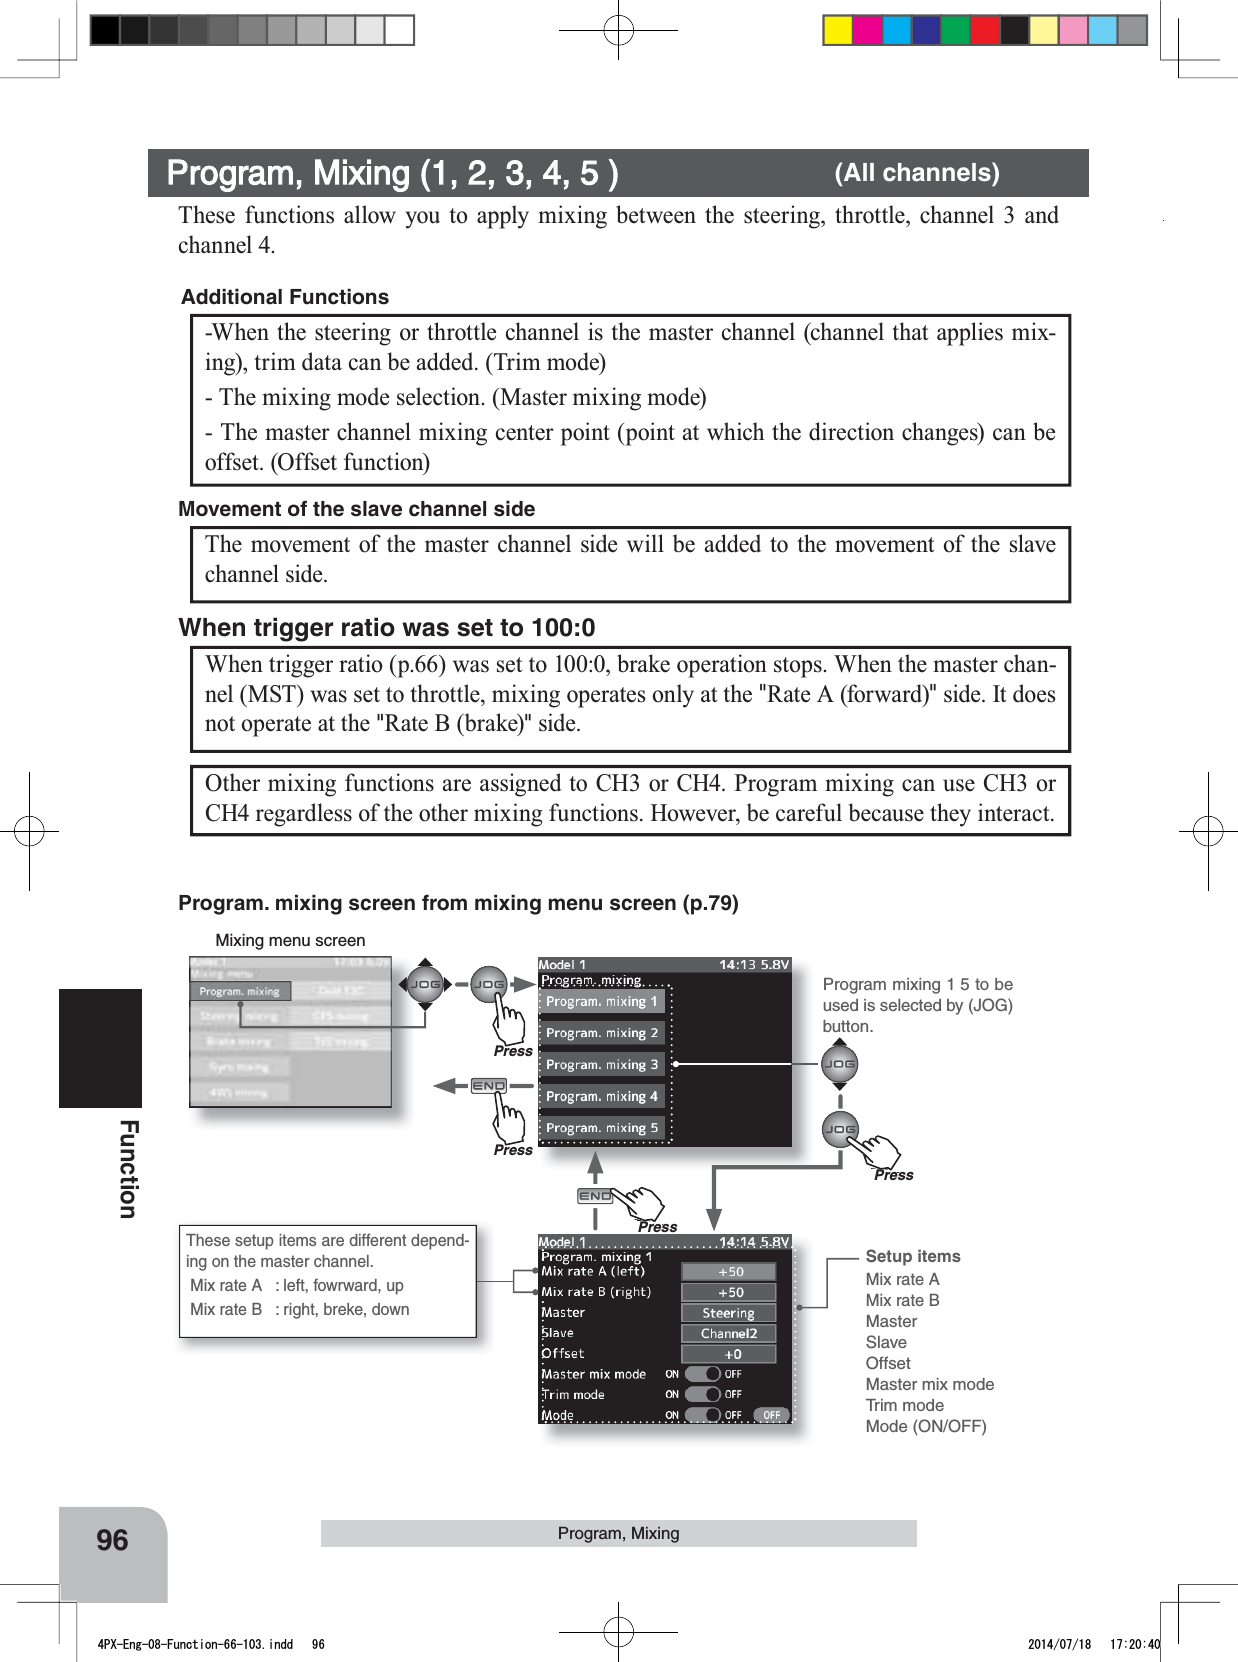 Program mixing 1 5 to be used is selected by (JOG) button.PressPressPu hPressPu hPress96FunctionProgram, MixingWhen trigger ratio (p.66) was set to 100:0, brake operation stops. When the master chan-nel (MST) was set to throttle, mixing operates only at the &quot;Rate A (forward)&quot; side. It does not operate at the &quot;Rate B (brake)&quot; side.When trigger ratio was set to 100:0Mixing menu screenOther mixing functions are assigned to CH3 or CH4. Program mixing can use CH3 or CH4 regardless of the other mixing functions. However, be careful because they interact.These setup items are different depend-ing on the master channel. Mix rate A  : left, fowrward, up Mix rate B  : right, breke, downThese functions allow you to apply mixing between the steering, throttle, channel 3 and channel 4.-When the steering or throttle channel is the master channel (channel that applies mix-ing), trim data can be added. (Trim mode)- The mixing mode selection. (Master mixing mode) - The master channel mixing center point (point at which the direction changes) can be offset. (Offset function)Additional Functions The movement of the master channel side will be added to the movement of the slave channel side.Movement of the slave channel sideProgram, Mixing (1, 2, 3, 4, 5 )       (All channels)Setup itemsMix rate AMix rate BMasterSlaveOffsetMaster mix modeTrim modeMode (ON/OFF)Program. mixing screen from mixing menu screen (p.79)4PX-Eng-08-Function-66-103.indd   96 2014/07/18   17:20:40